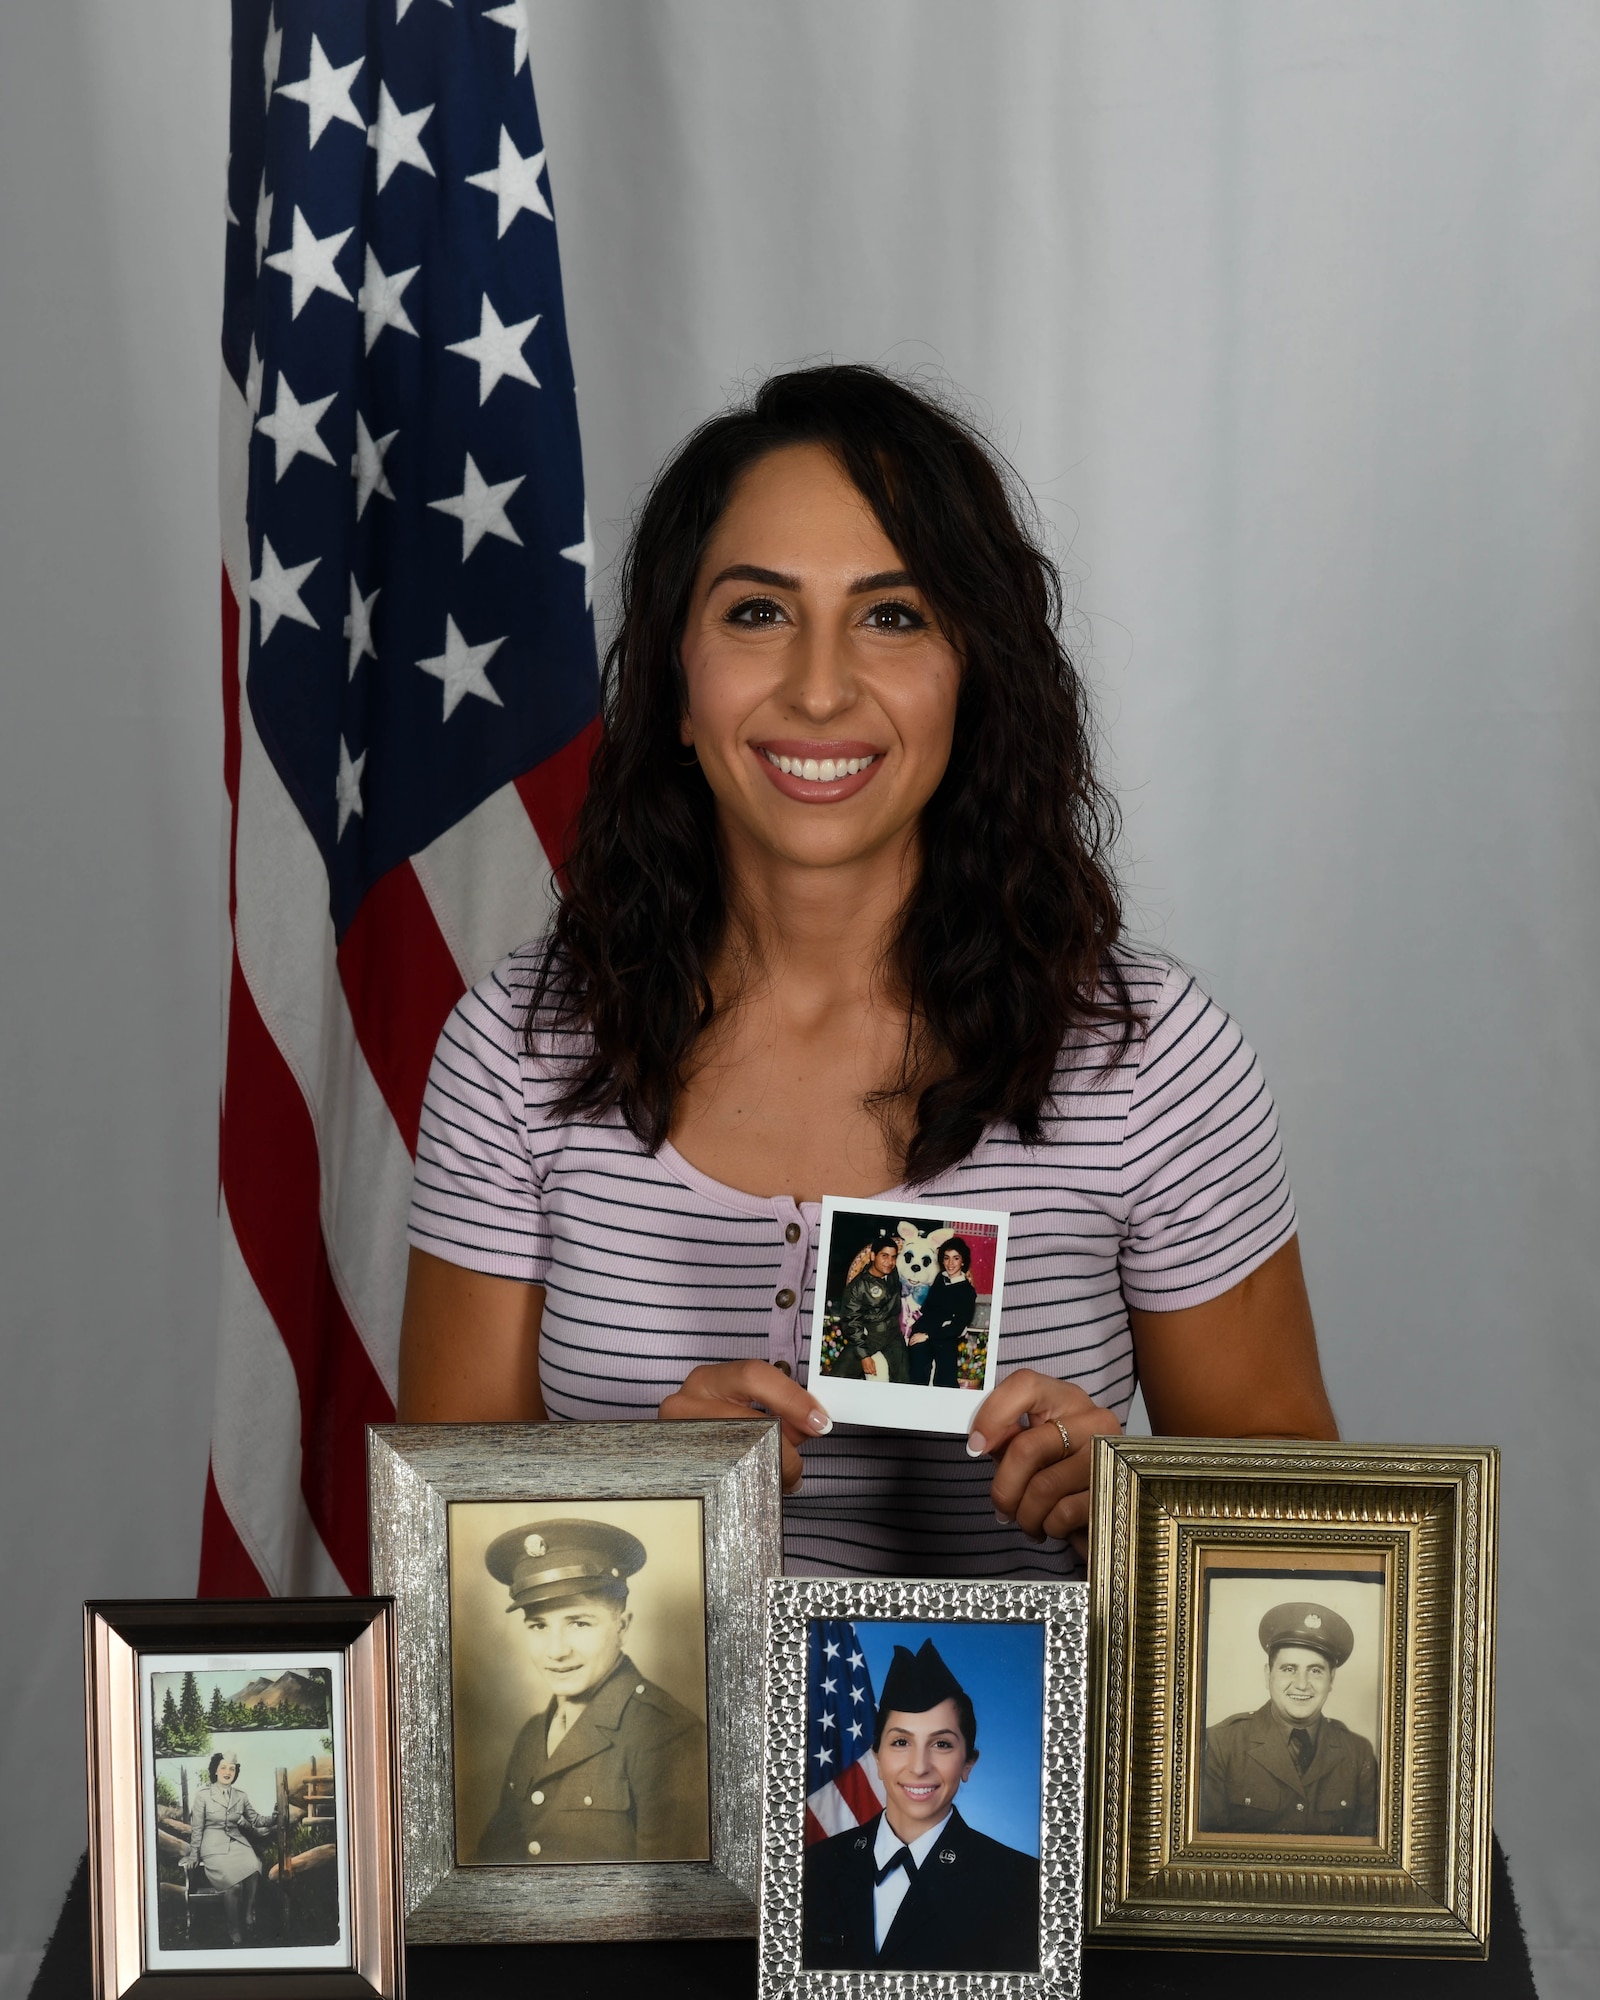 Senior Airman Christina Russo, a public affairs specialist with the 910th Airlift Wing, poses for a photo on Aug. 13, 2020, at Youngstown Air Reserve Station. The photos on display represent the military lineage within her family.